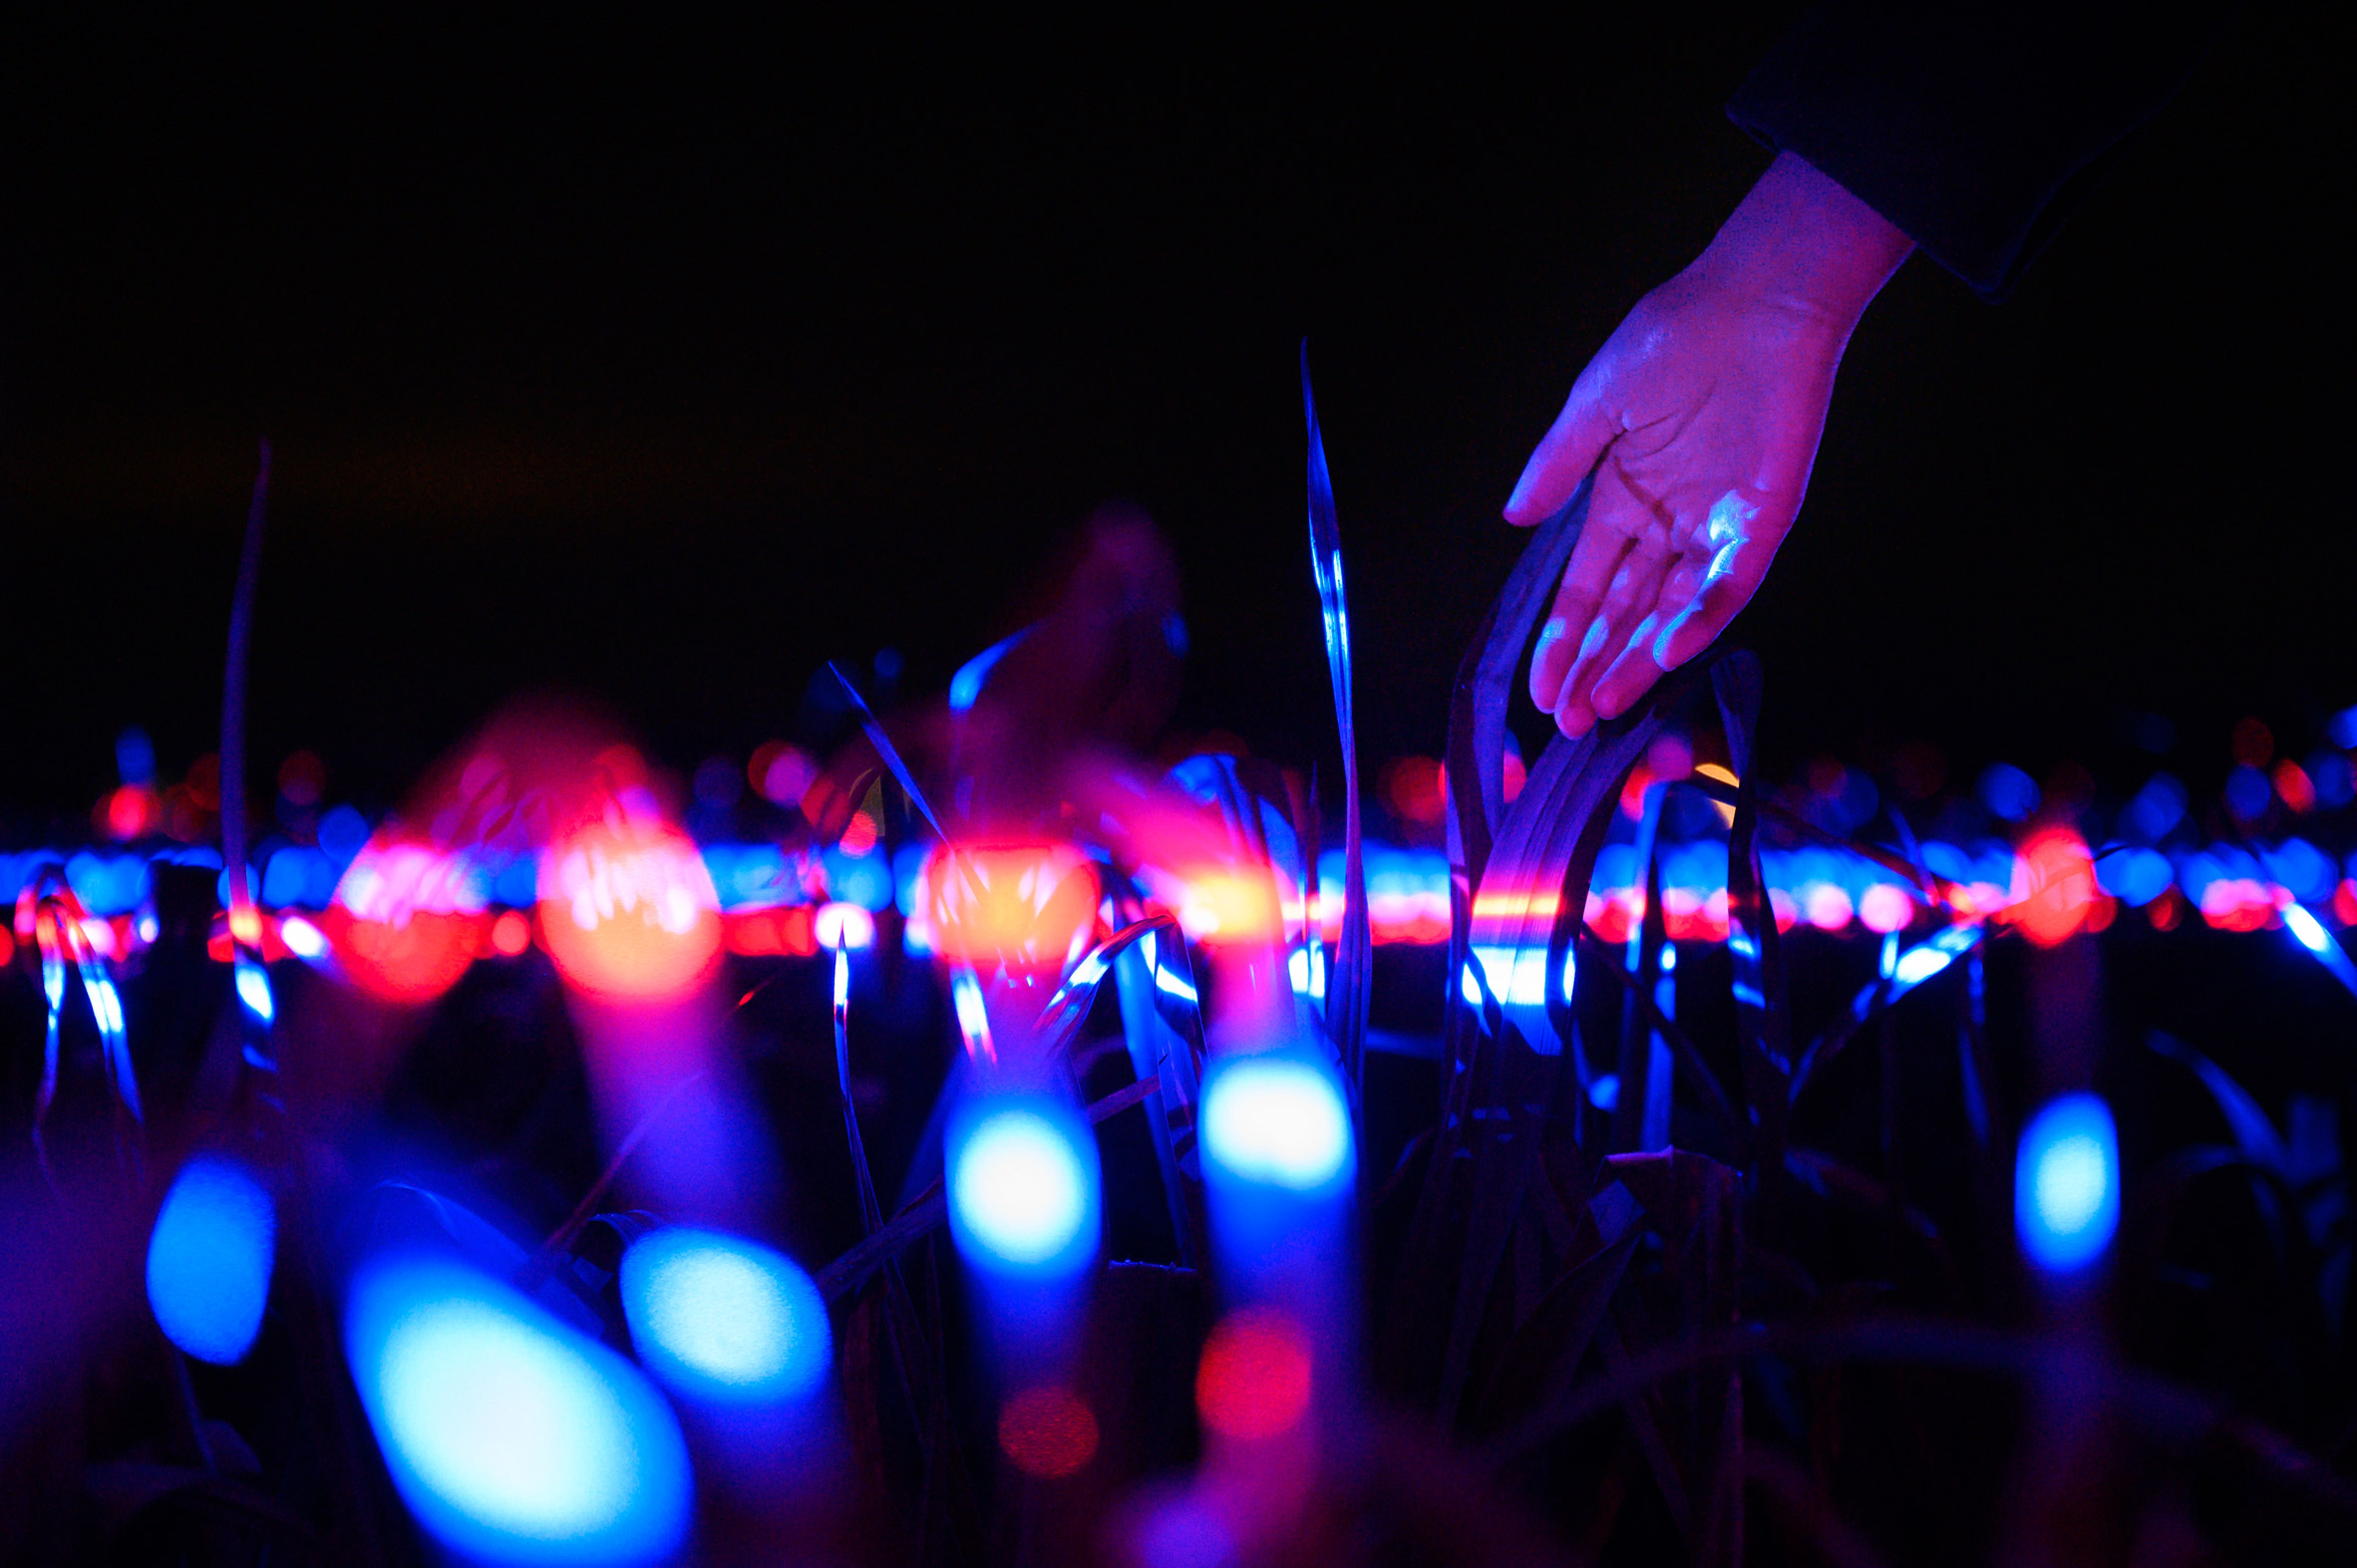 Close-up of crops in Grow installation by Studio Roosegaarde